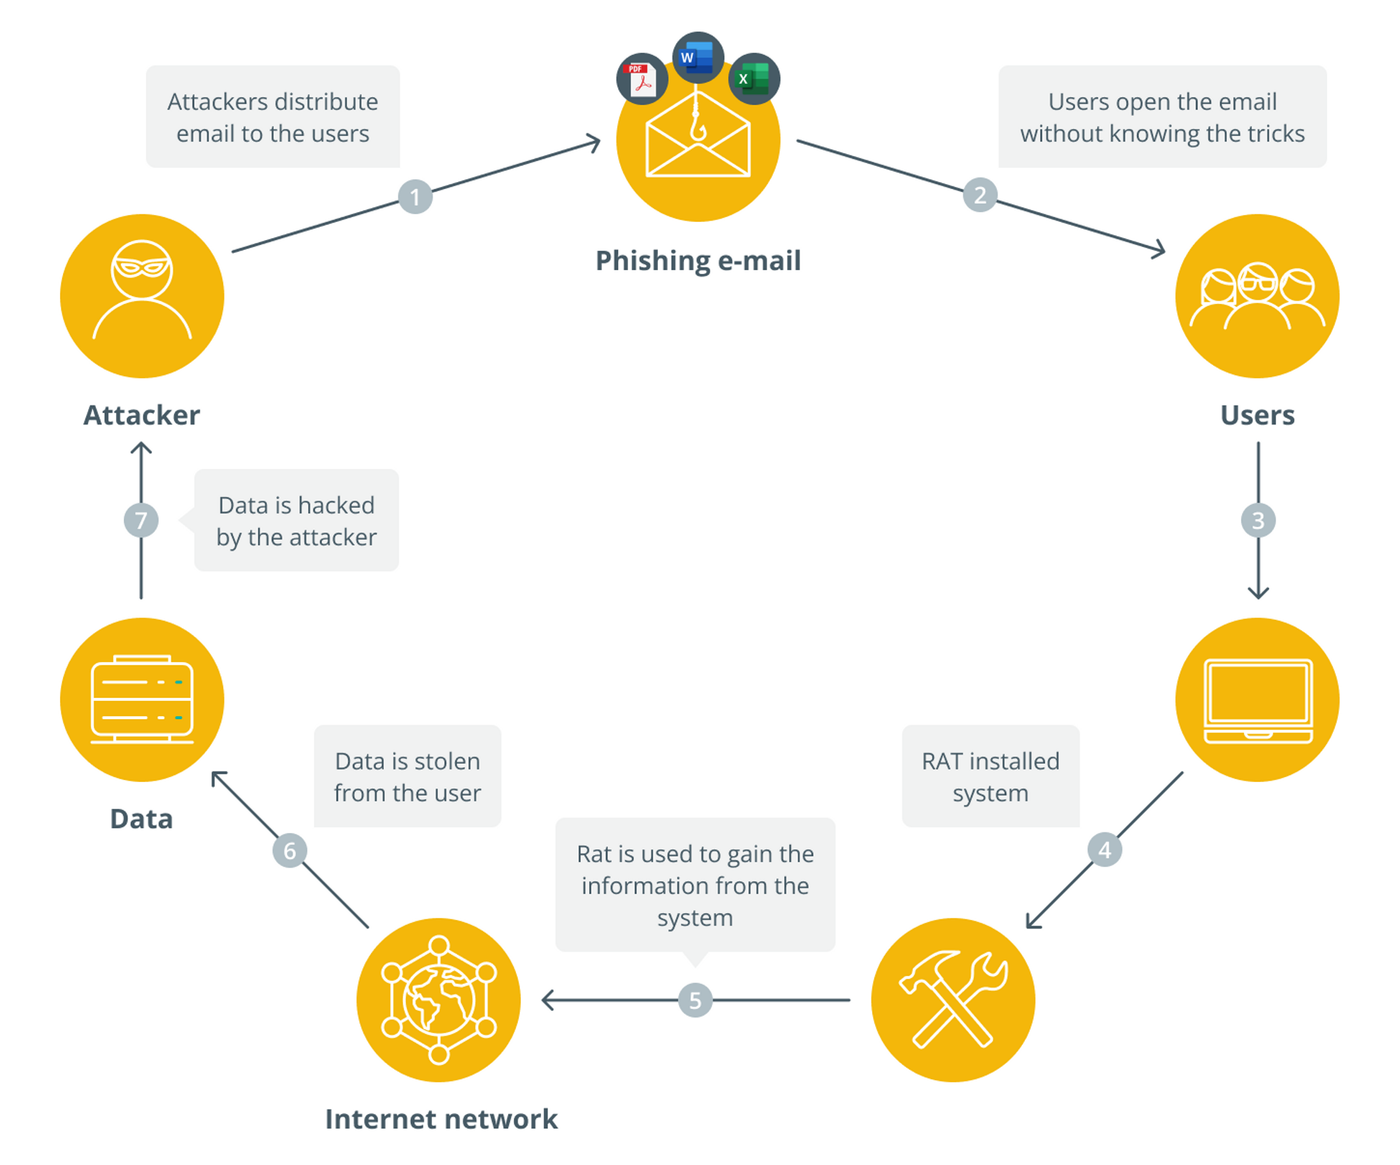 Infographic showing the circular steps of a phishing scam, each step in an orange box with white text in this order: Phishing email, Users, Malware installation, Internet network used to gain information, Data retrieval, Received by attacker, who then sends phishing emails to new contacts obtained from the last phishing attack